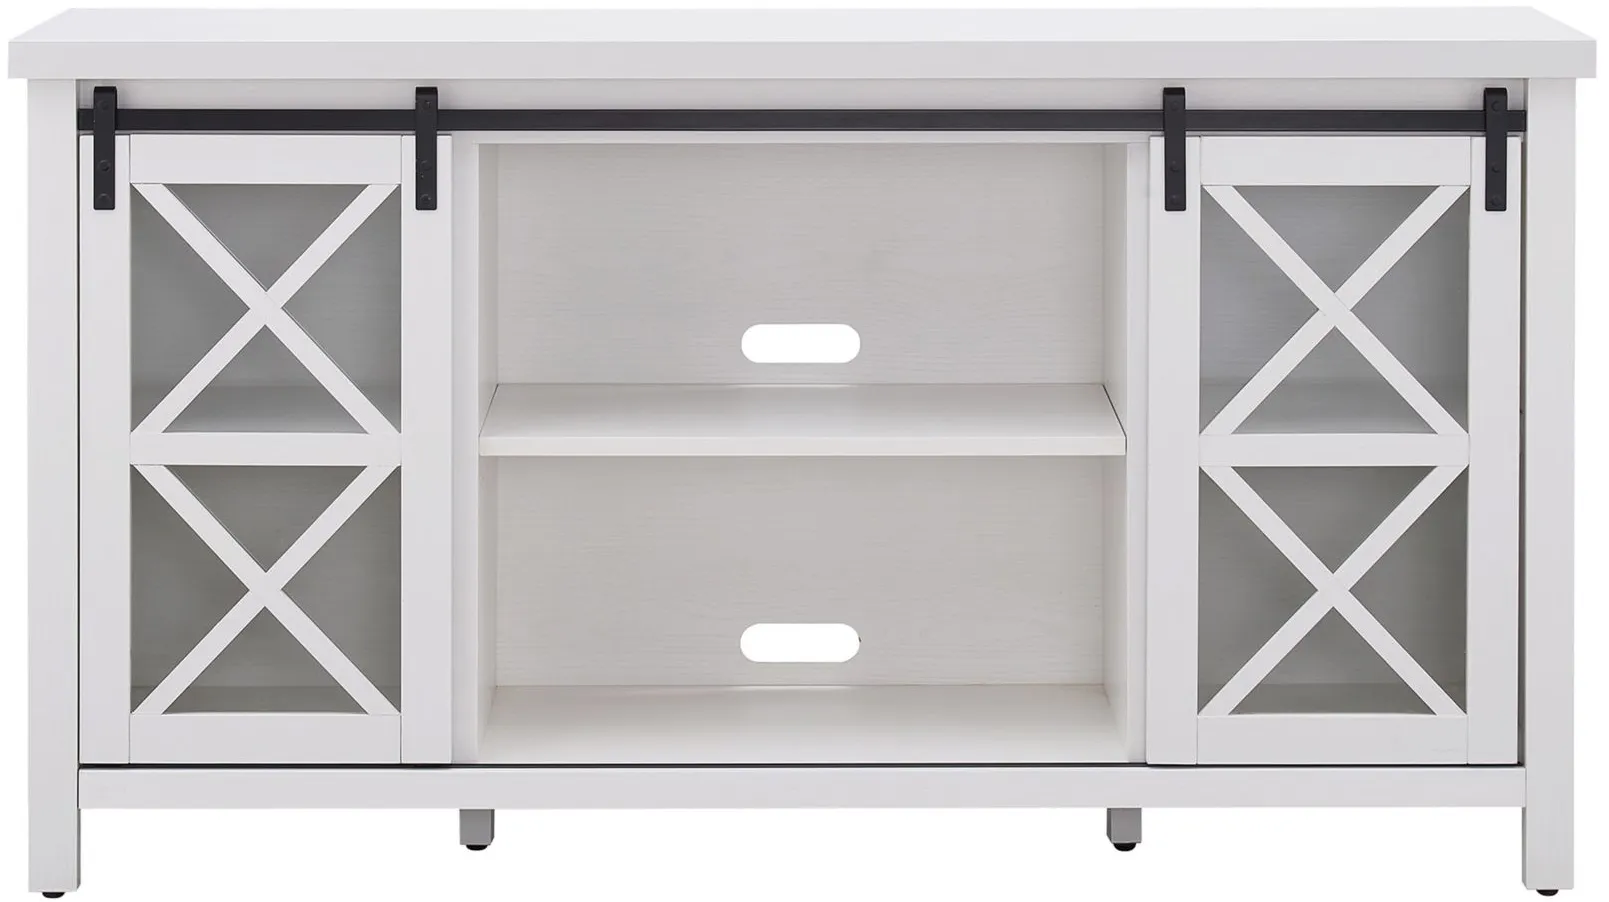 Smith 58" TV Stand in White by Hudson & Canal